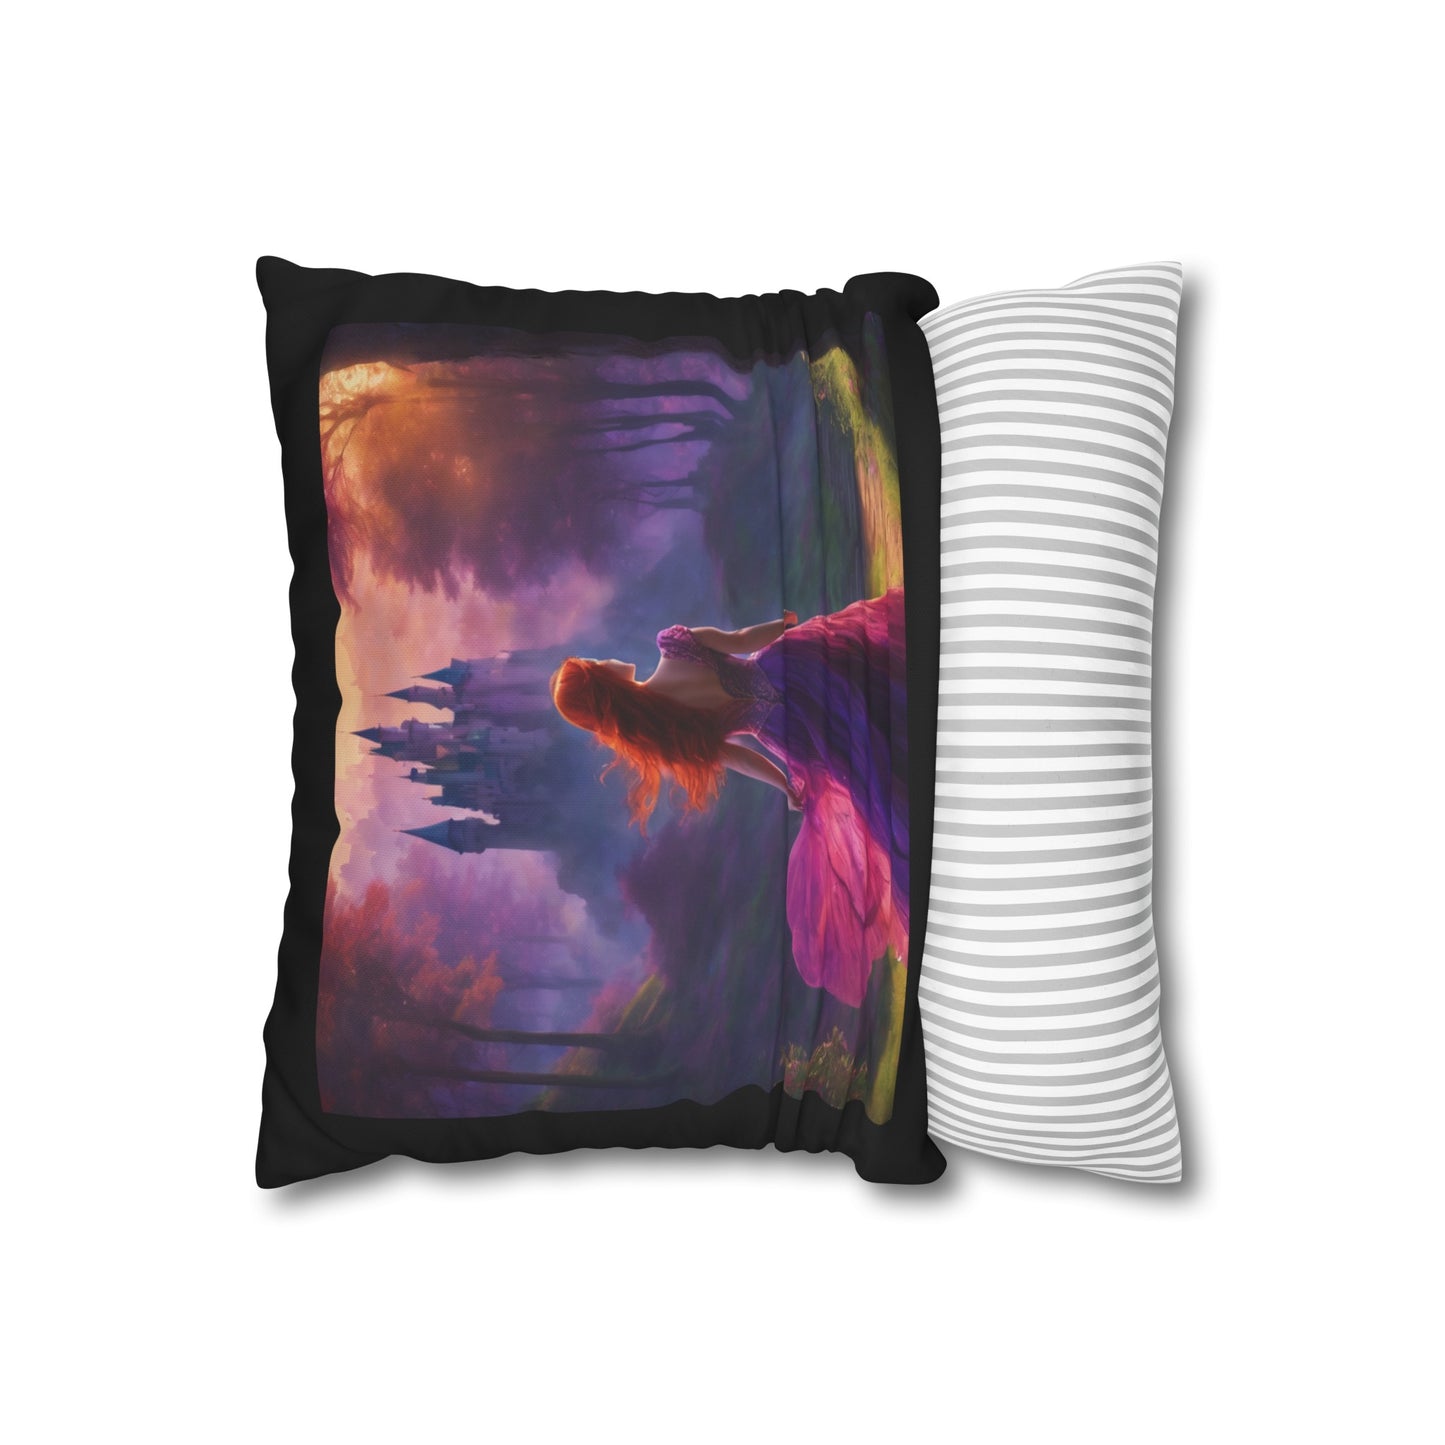 Once Upon A Fantasy #2 Cushion Cover - Black